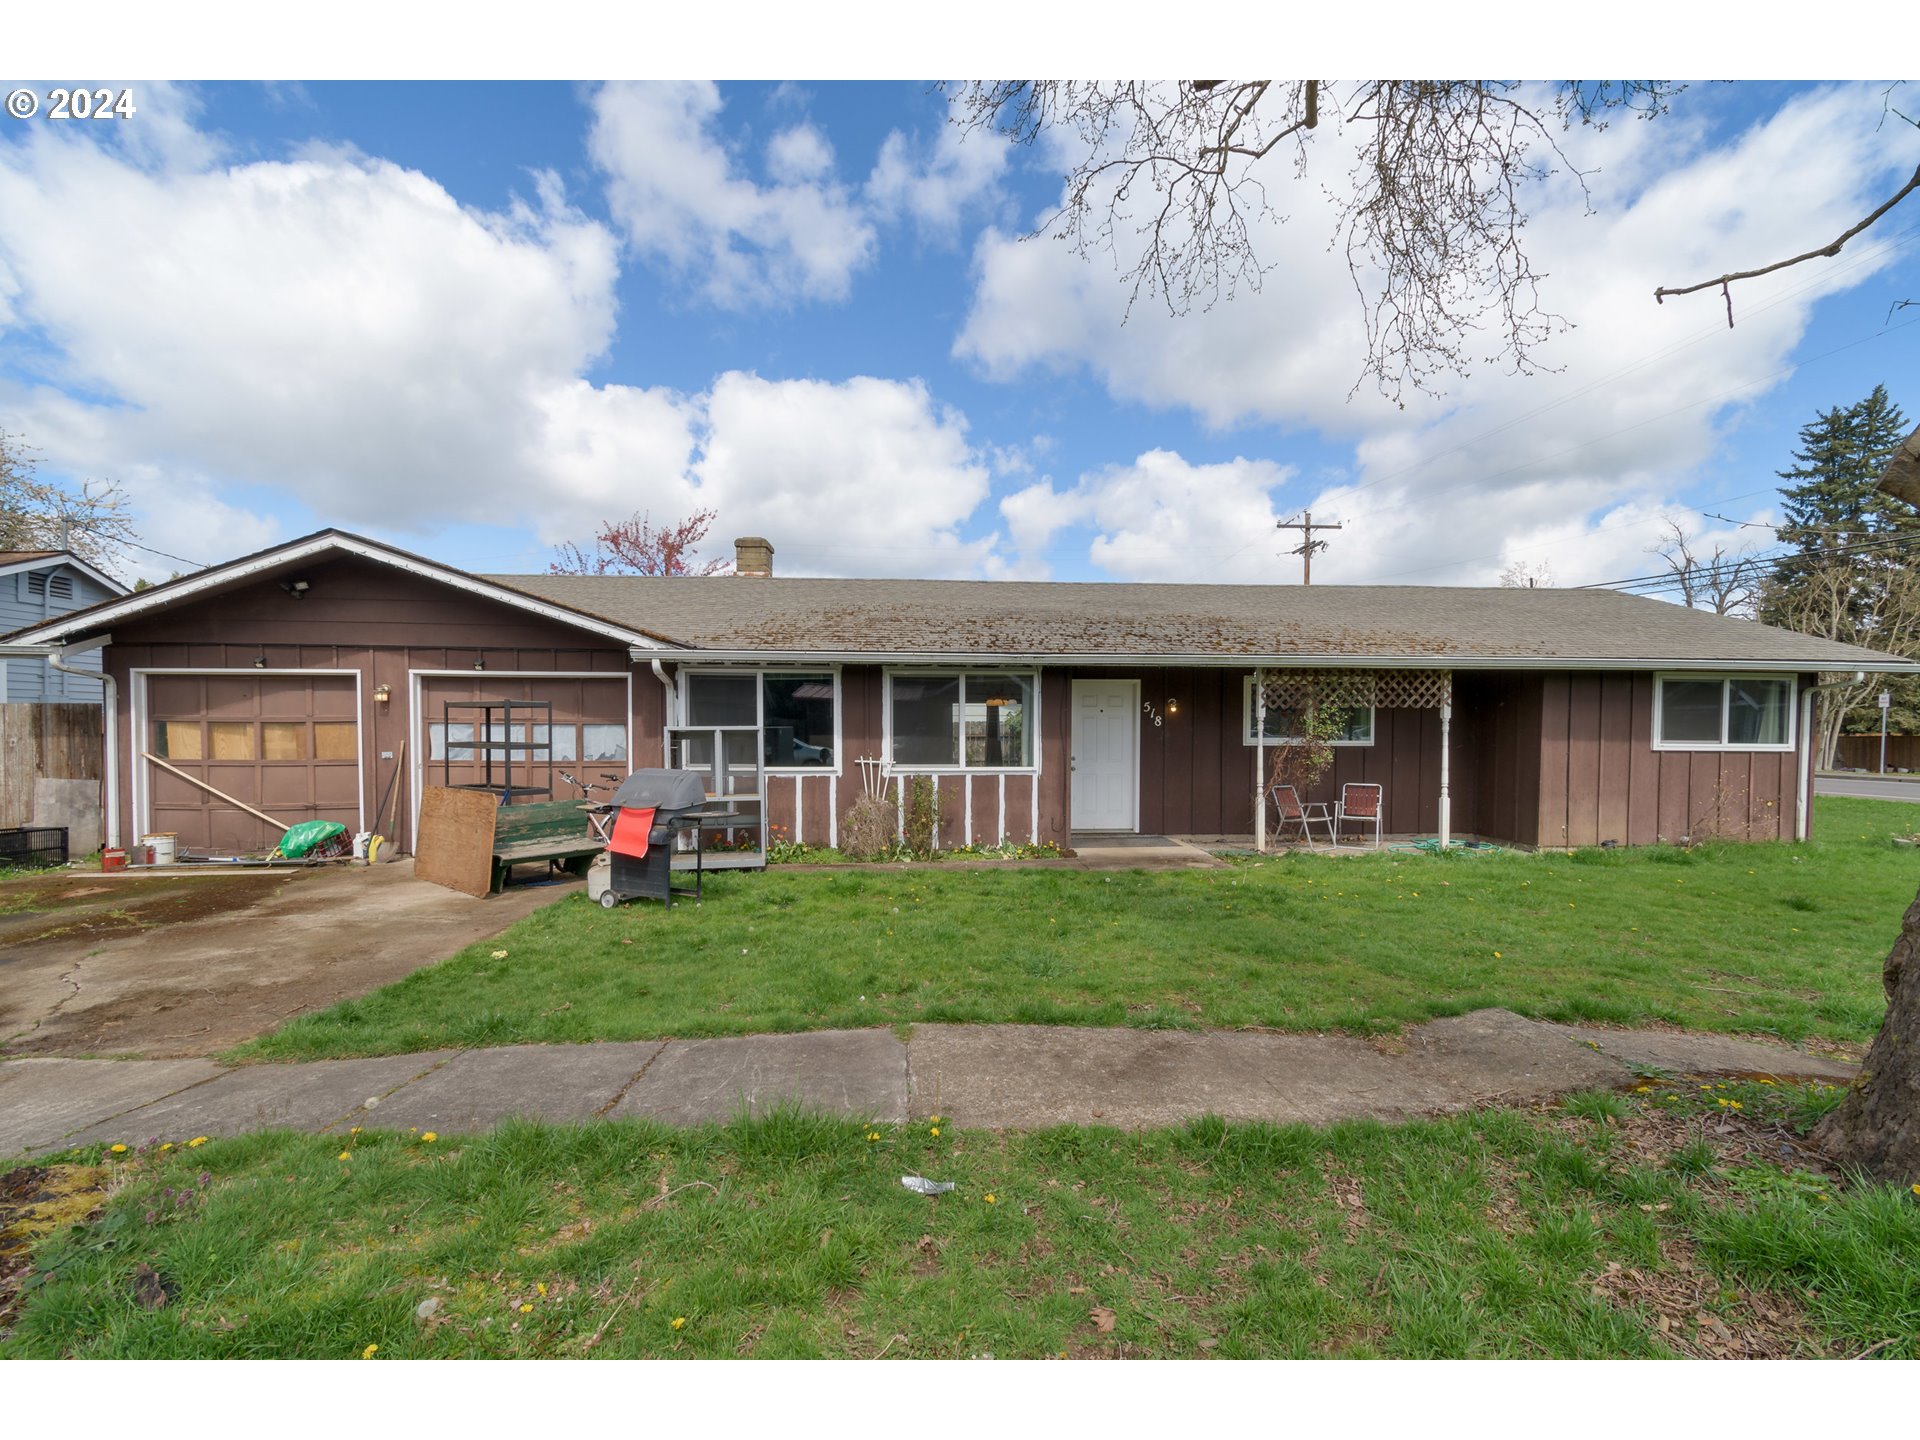 518 Scarbrough AVE, Creswell, OR 